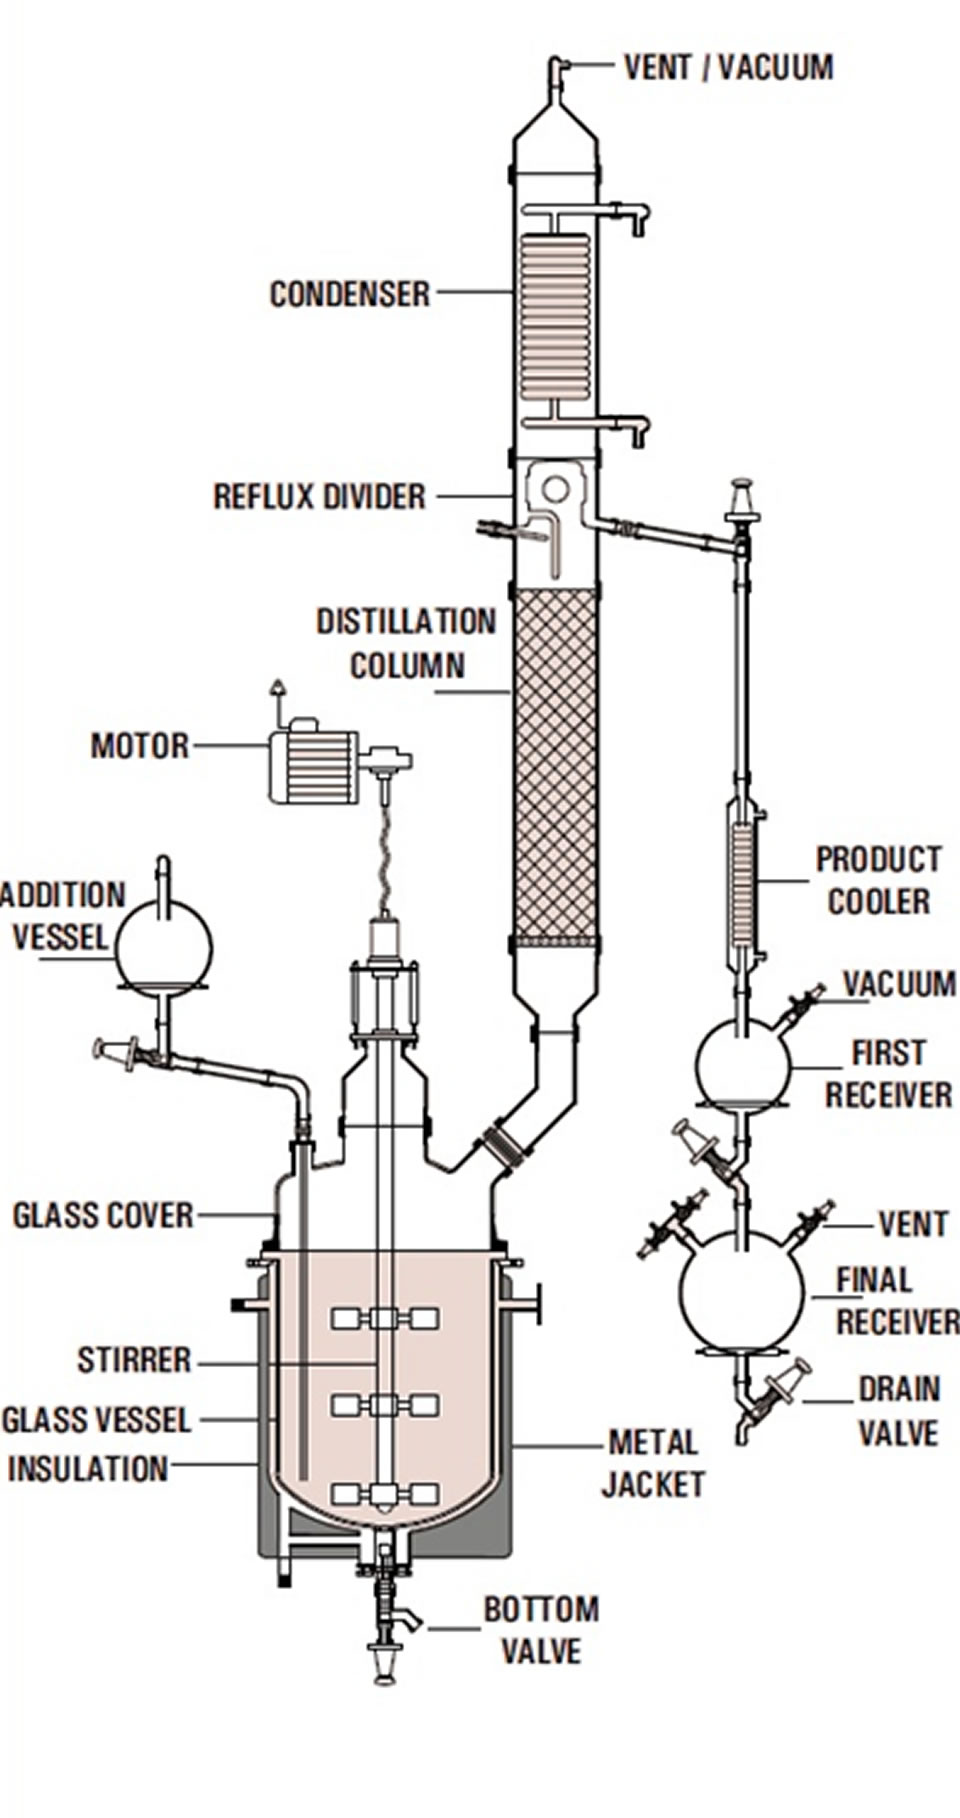 Metal Jacketed Glass Reactor